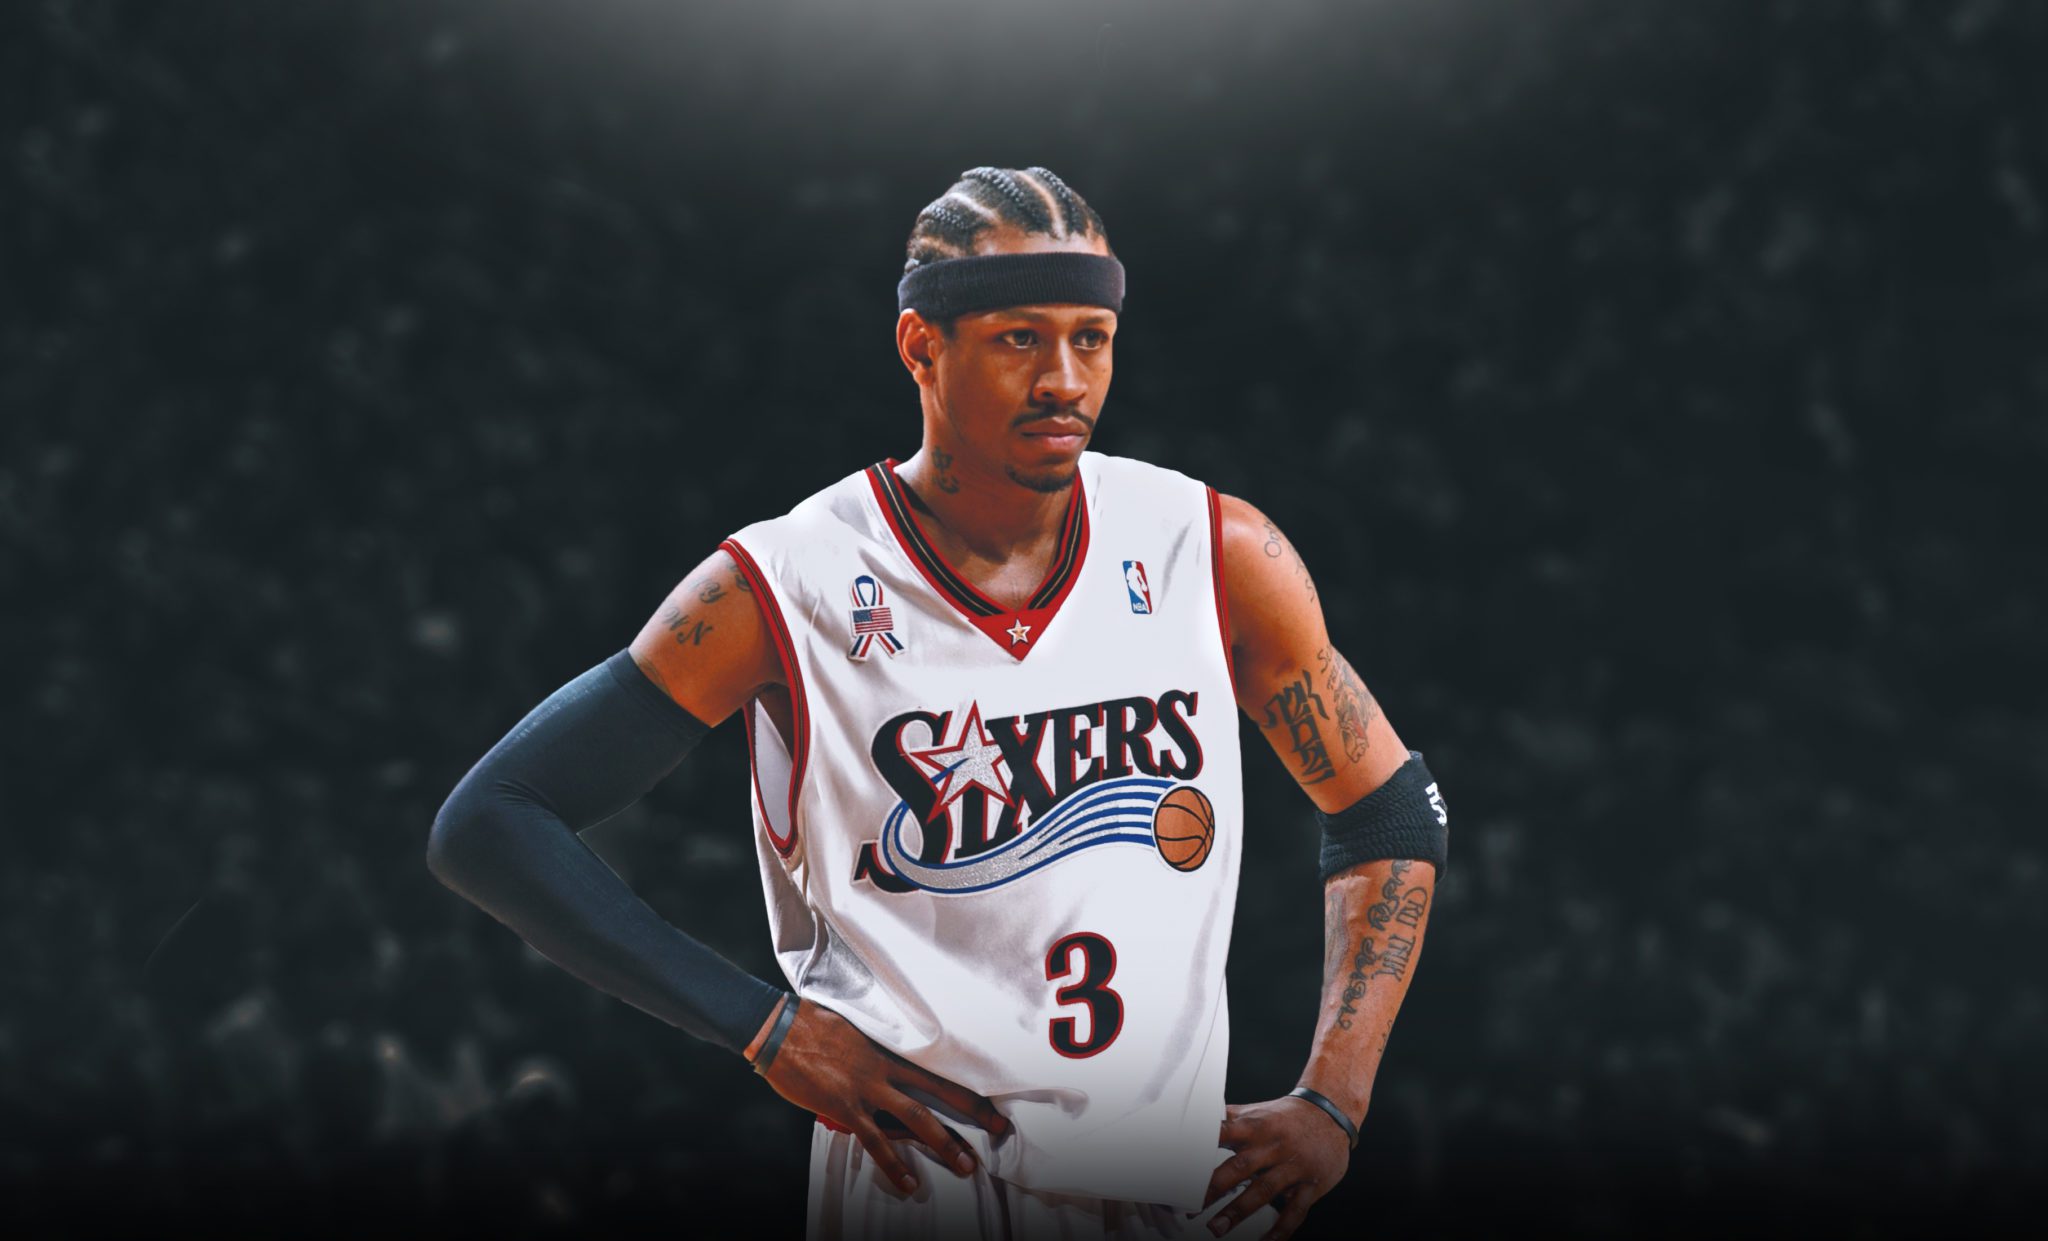 PRACTICE: The story behind Allen Iverson's press conference 